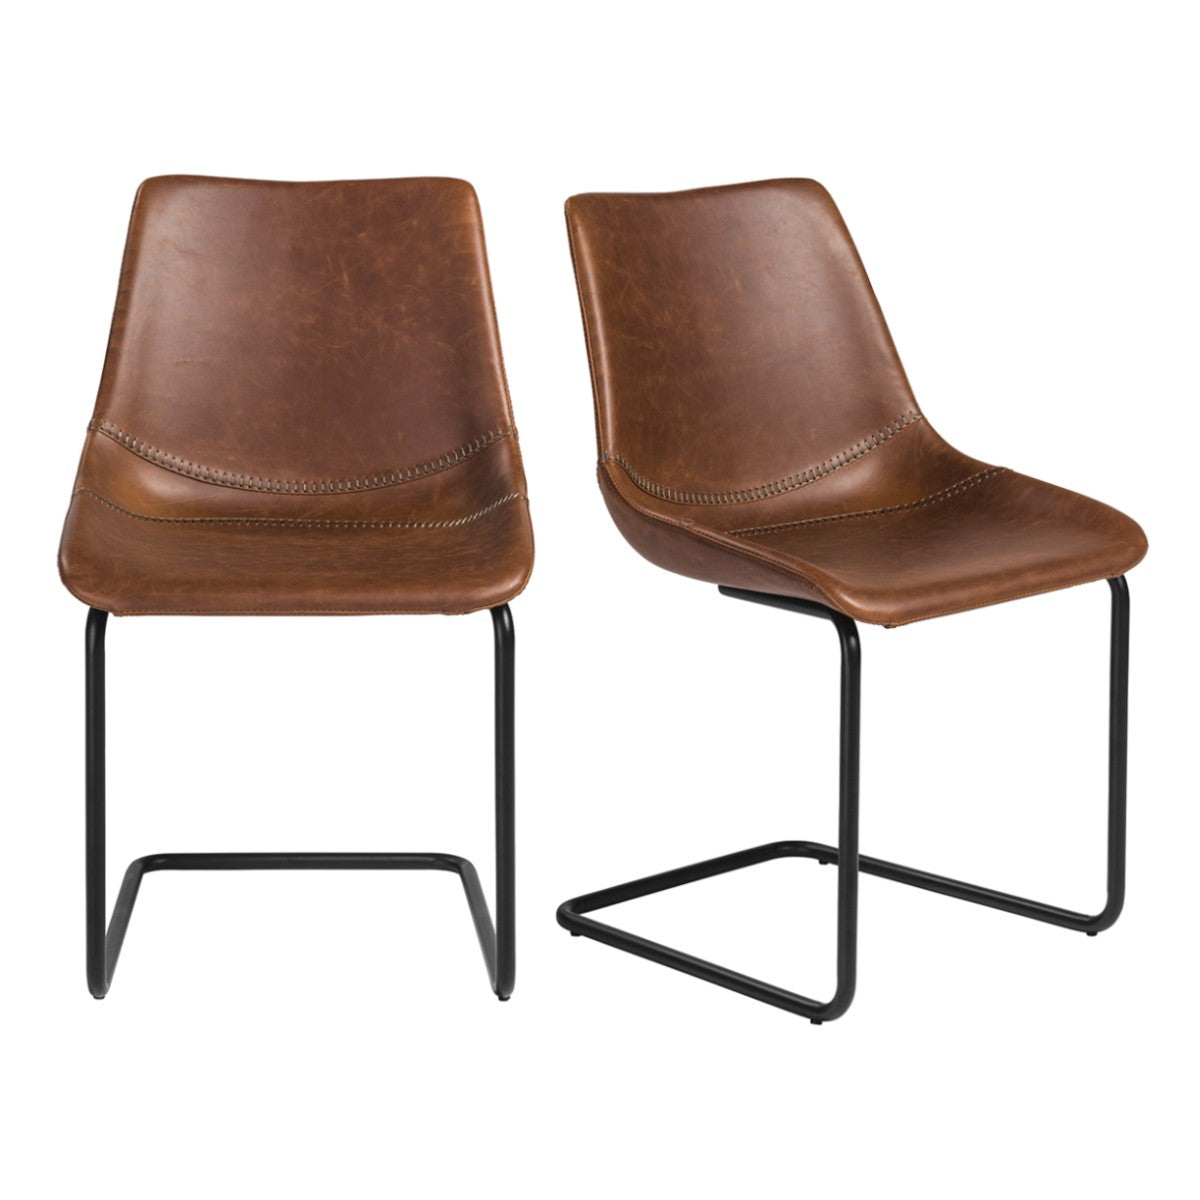 Set of Two Brown Faux Faux Leather Black Cantilever Chairs